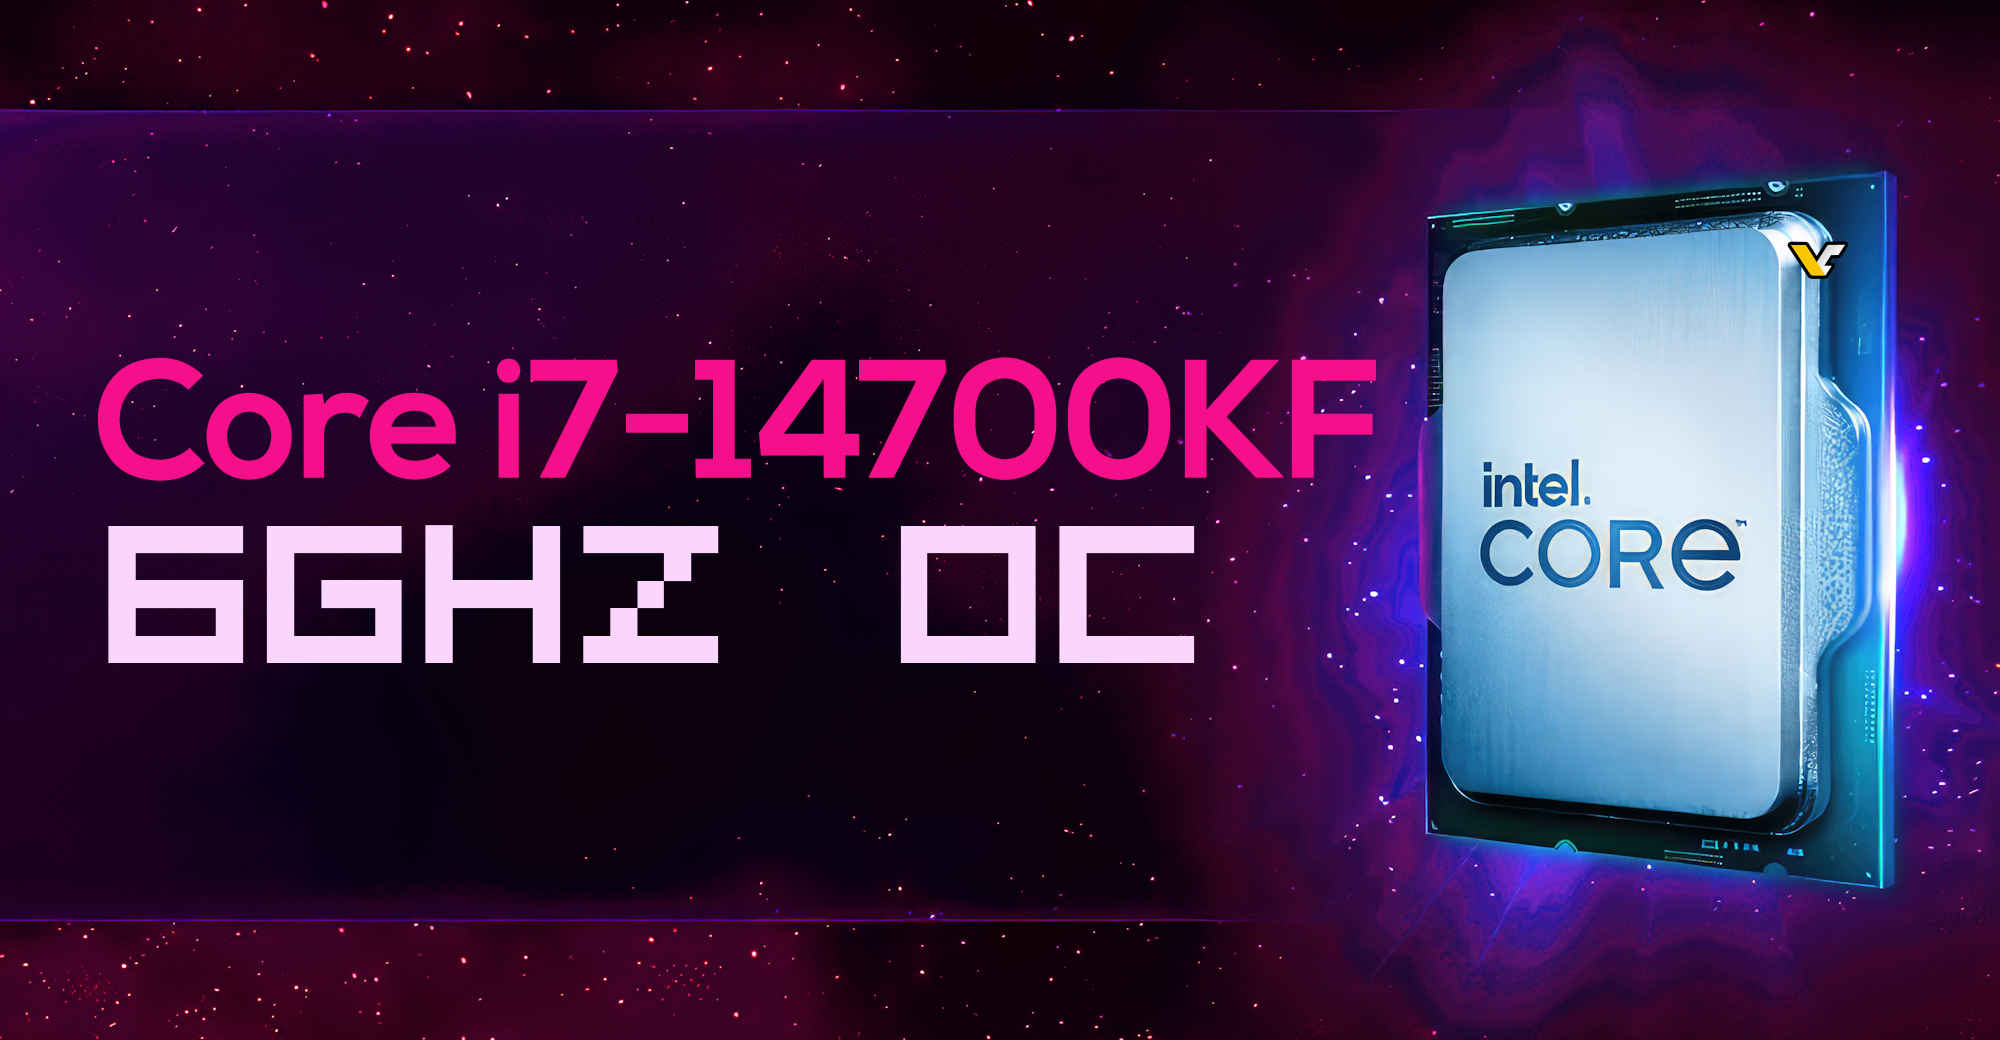 Intel's new 20-core i7-14700KF CPU spotted on Geekbench with 6.0 GHz OC 